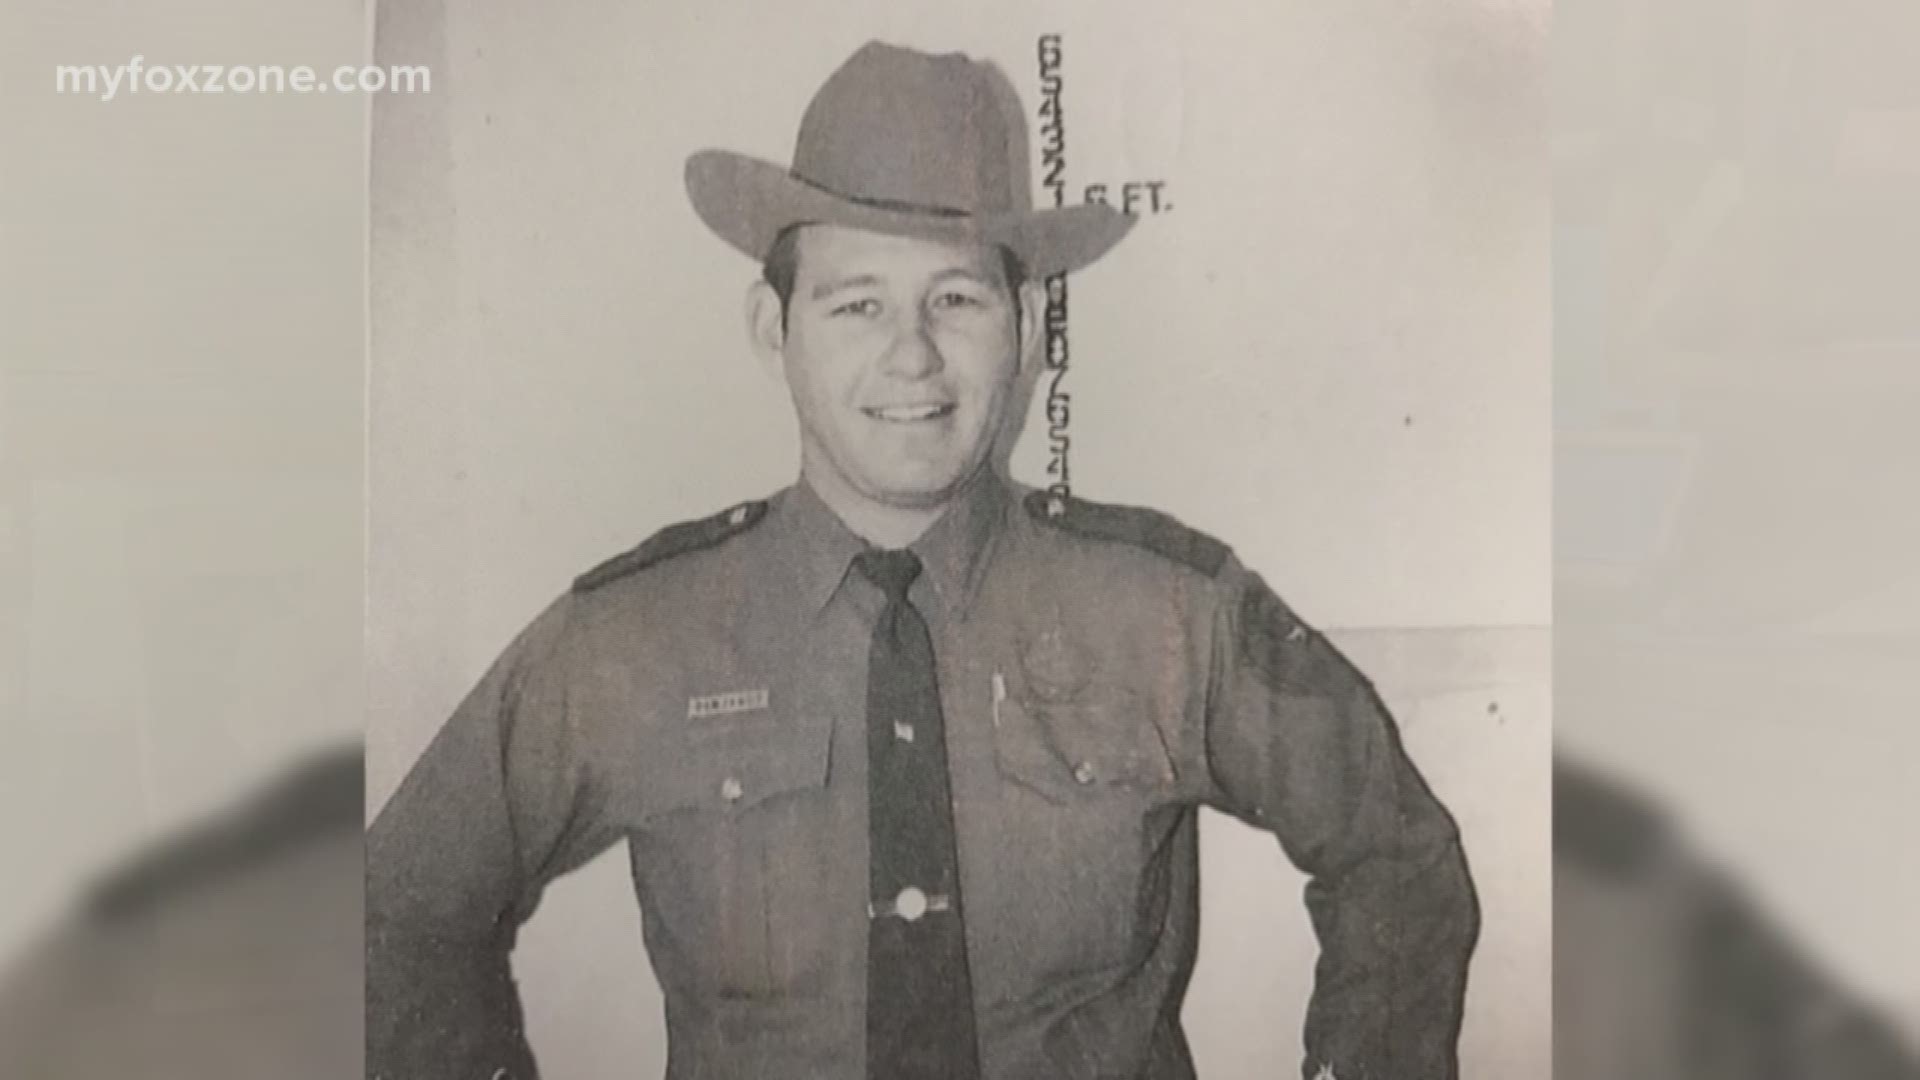 Courtesy, Service, Protection: Trooper's career spans half a century 